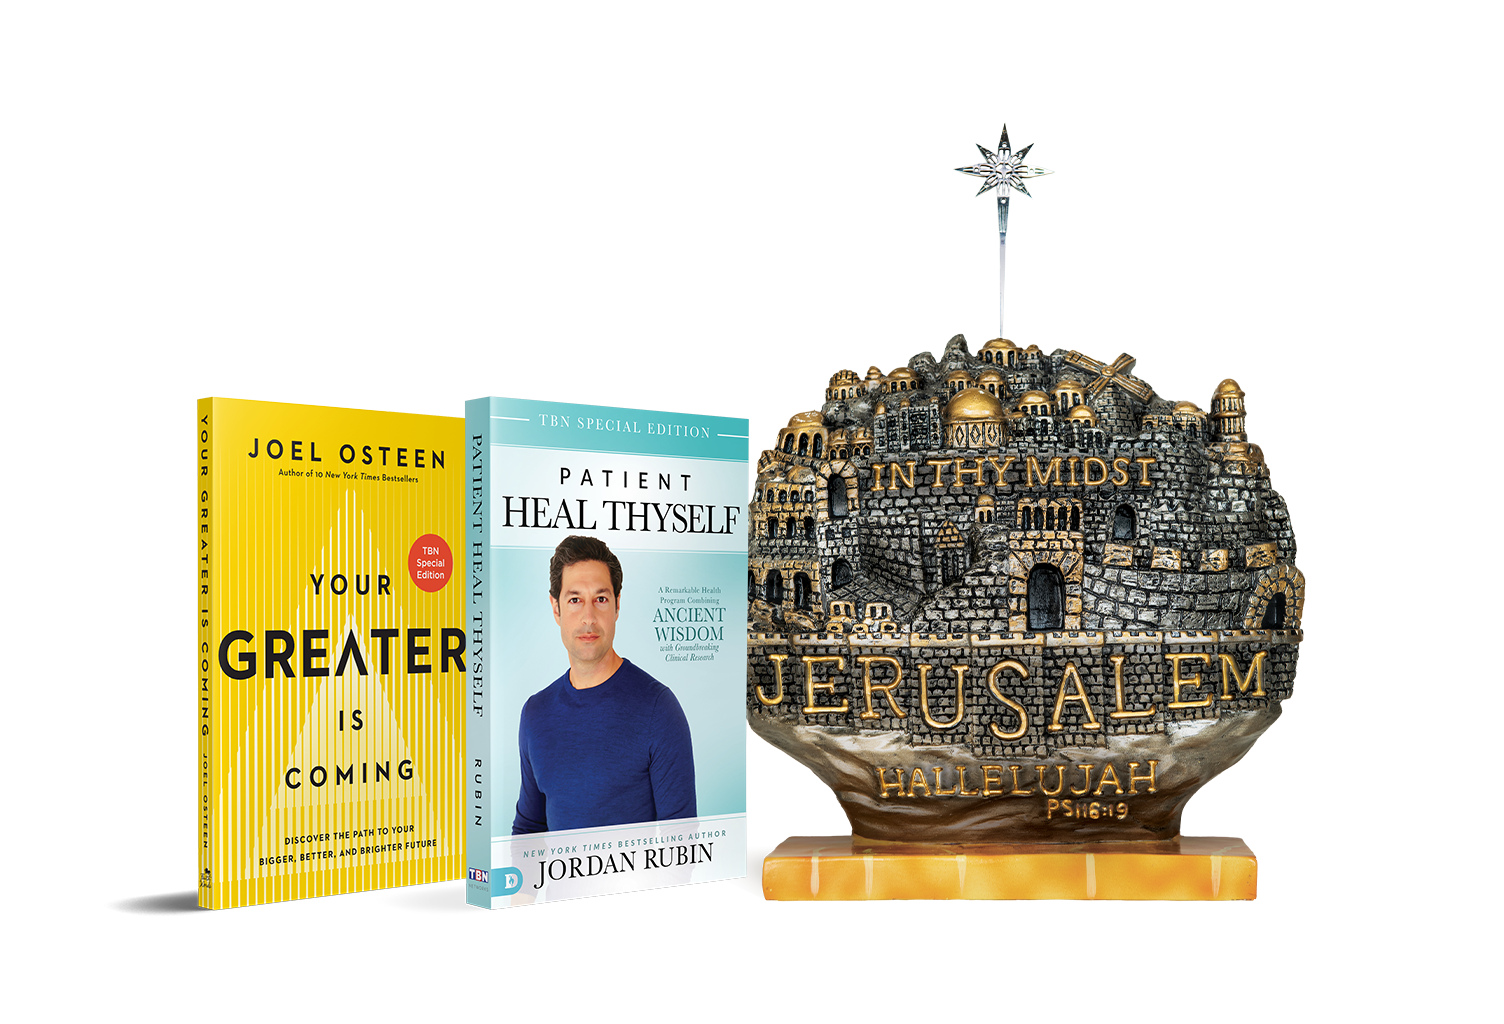 Receive Your Greater Is Coming by Joel Osteen, Patient Heal Thyself by Jordan Rubin books and Jerusalem in Thy Midst plaque, designed for TBN by craftsmen in Israel from TBN